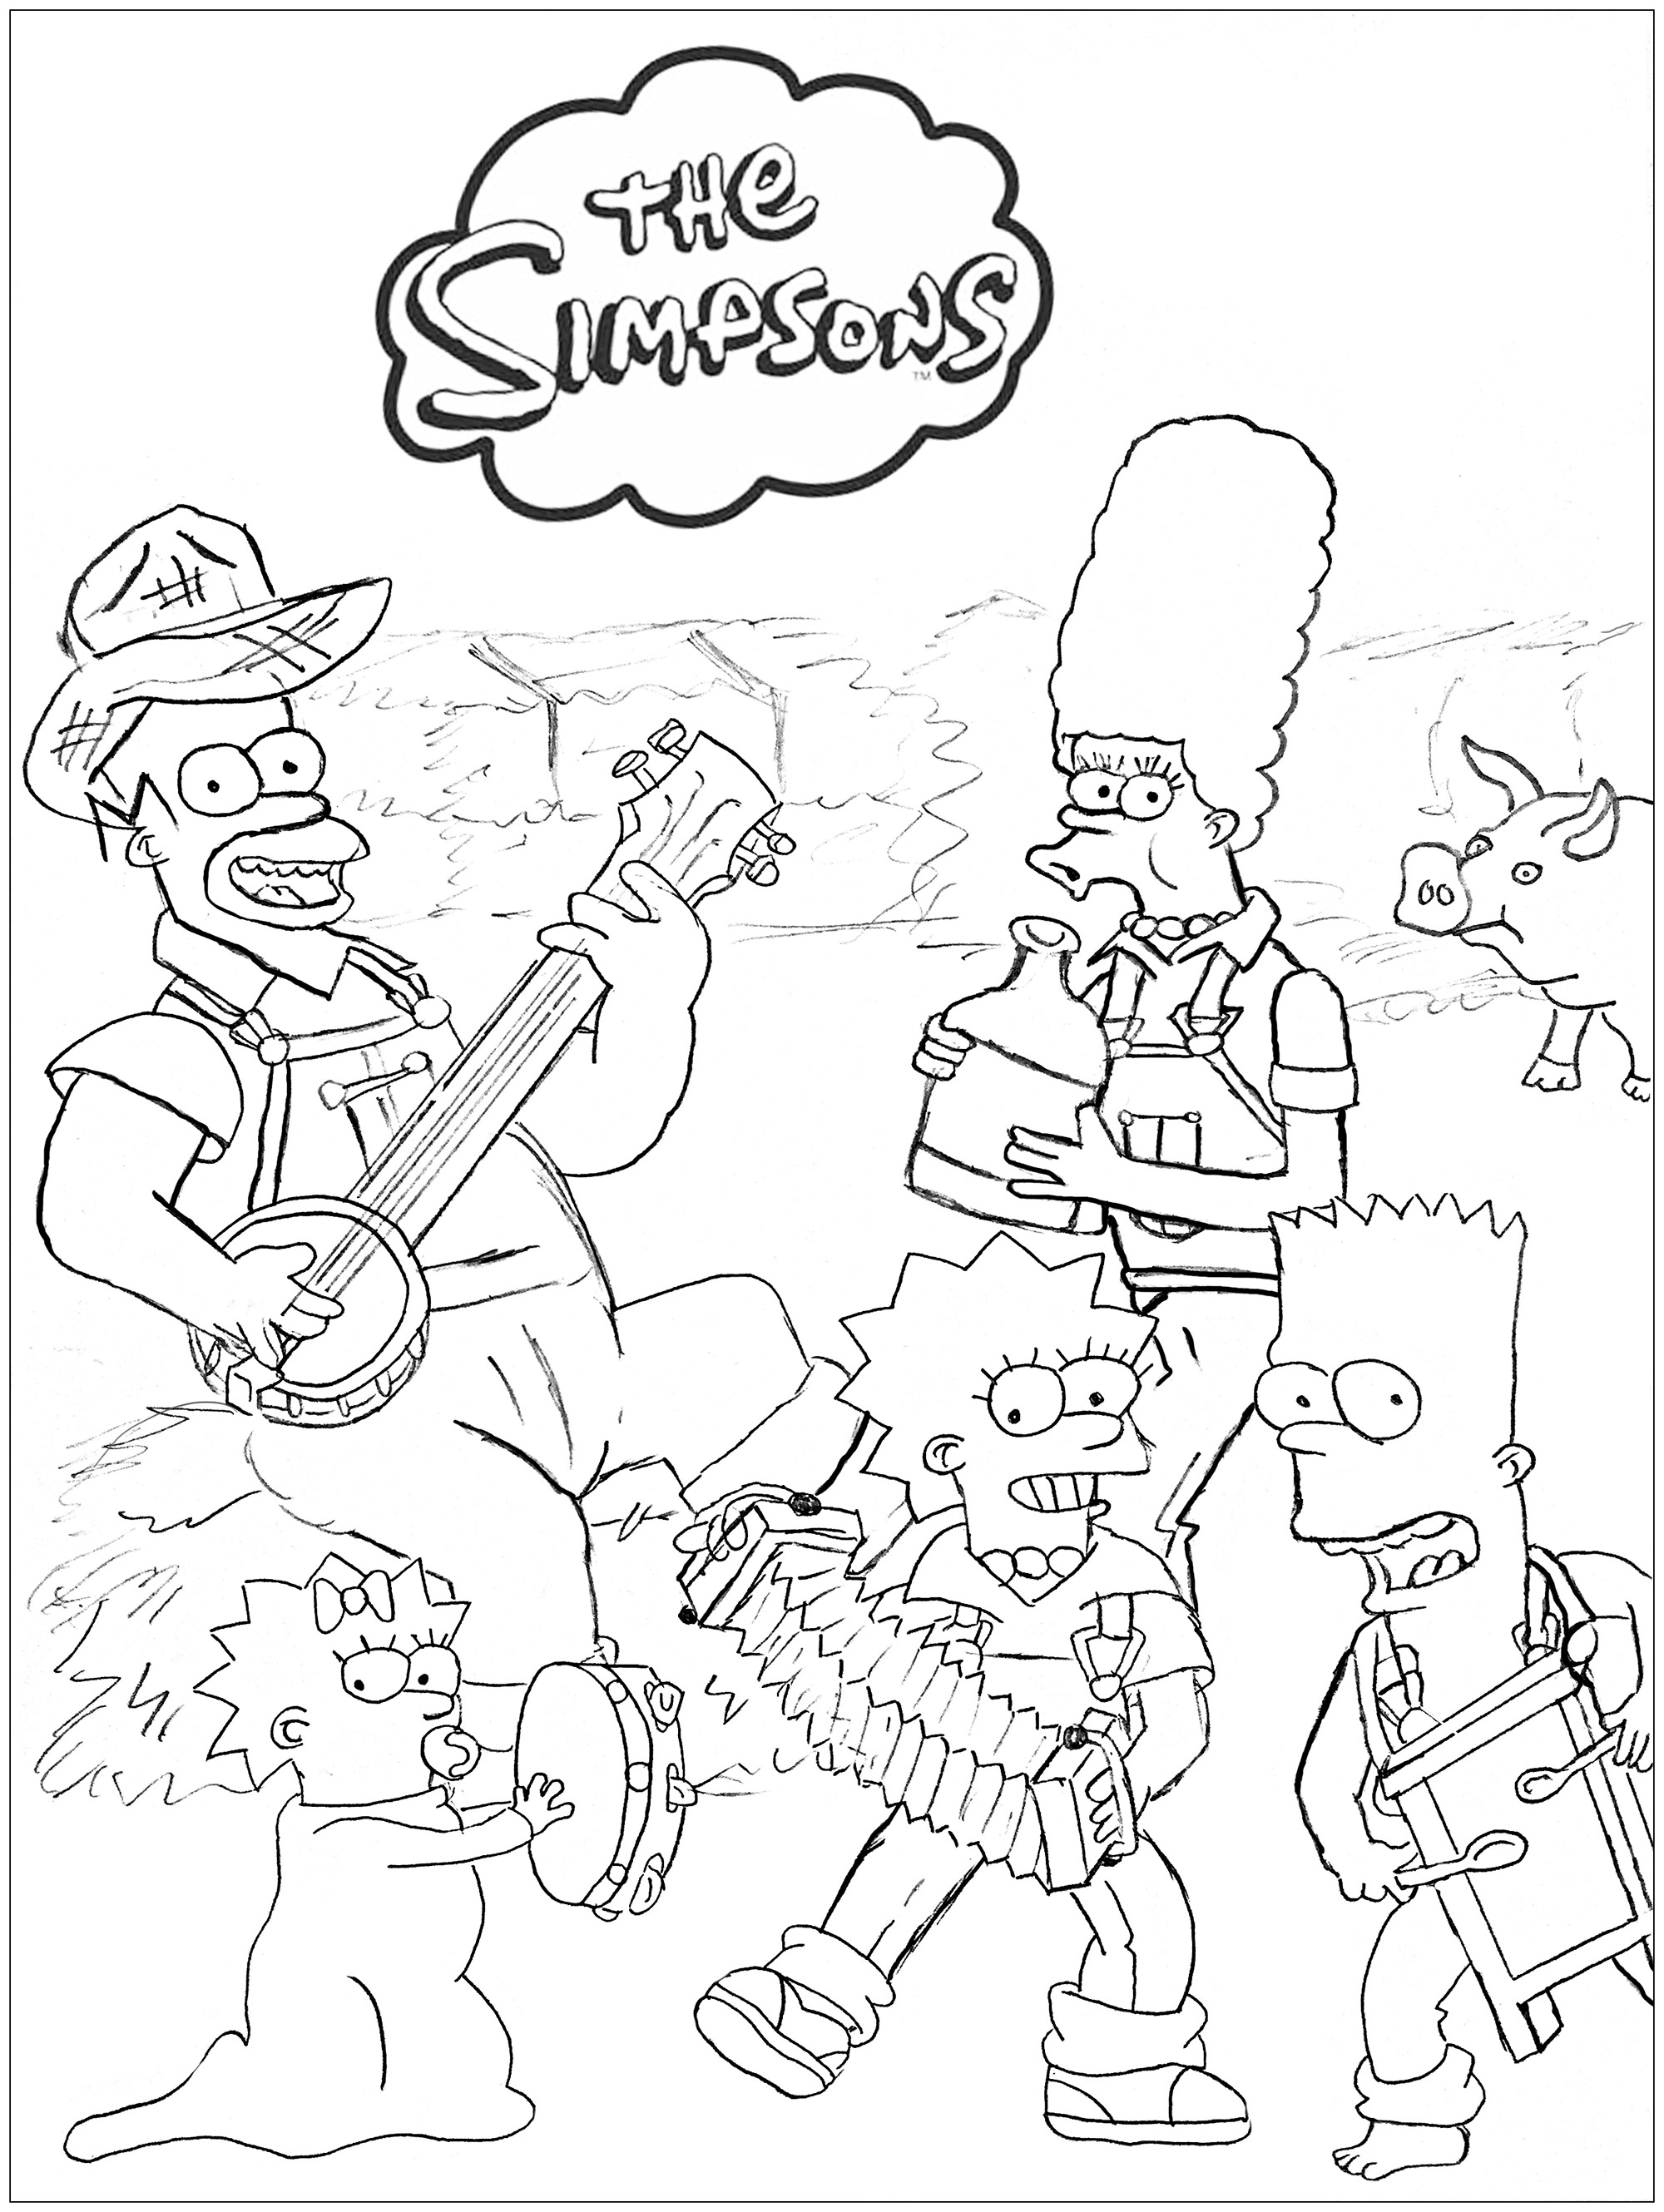 The Simpsons at the farm, original drawing inspired by the famous characters created by Matt Groening, Artist : Romain Delcroix